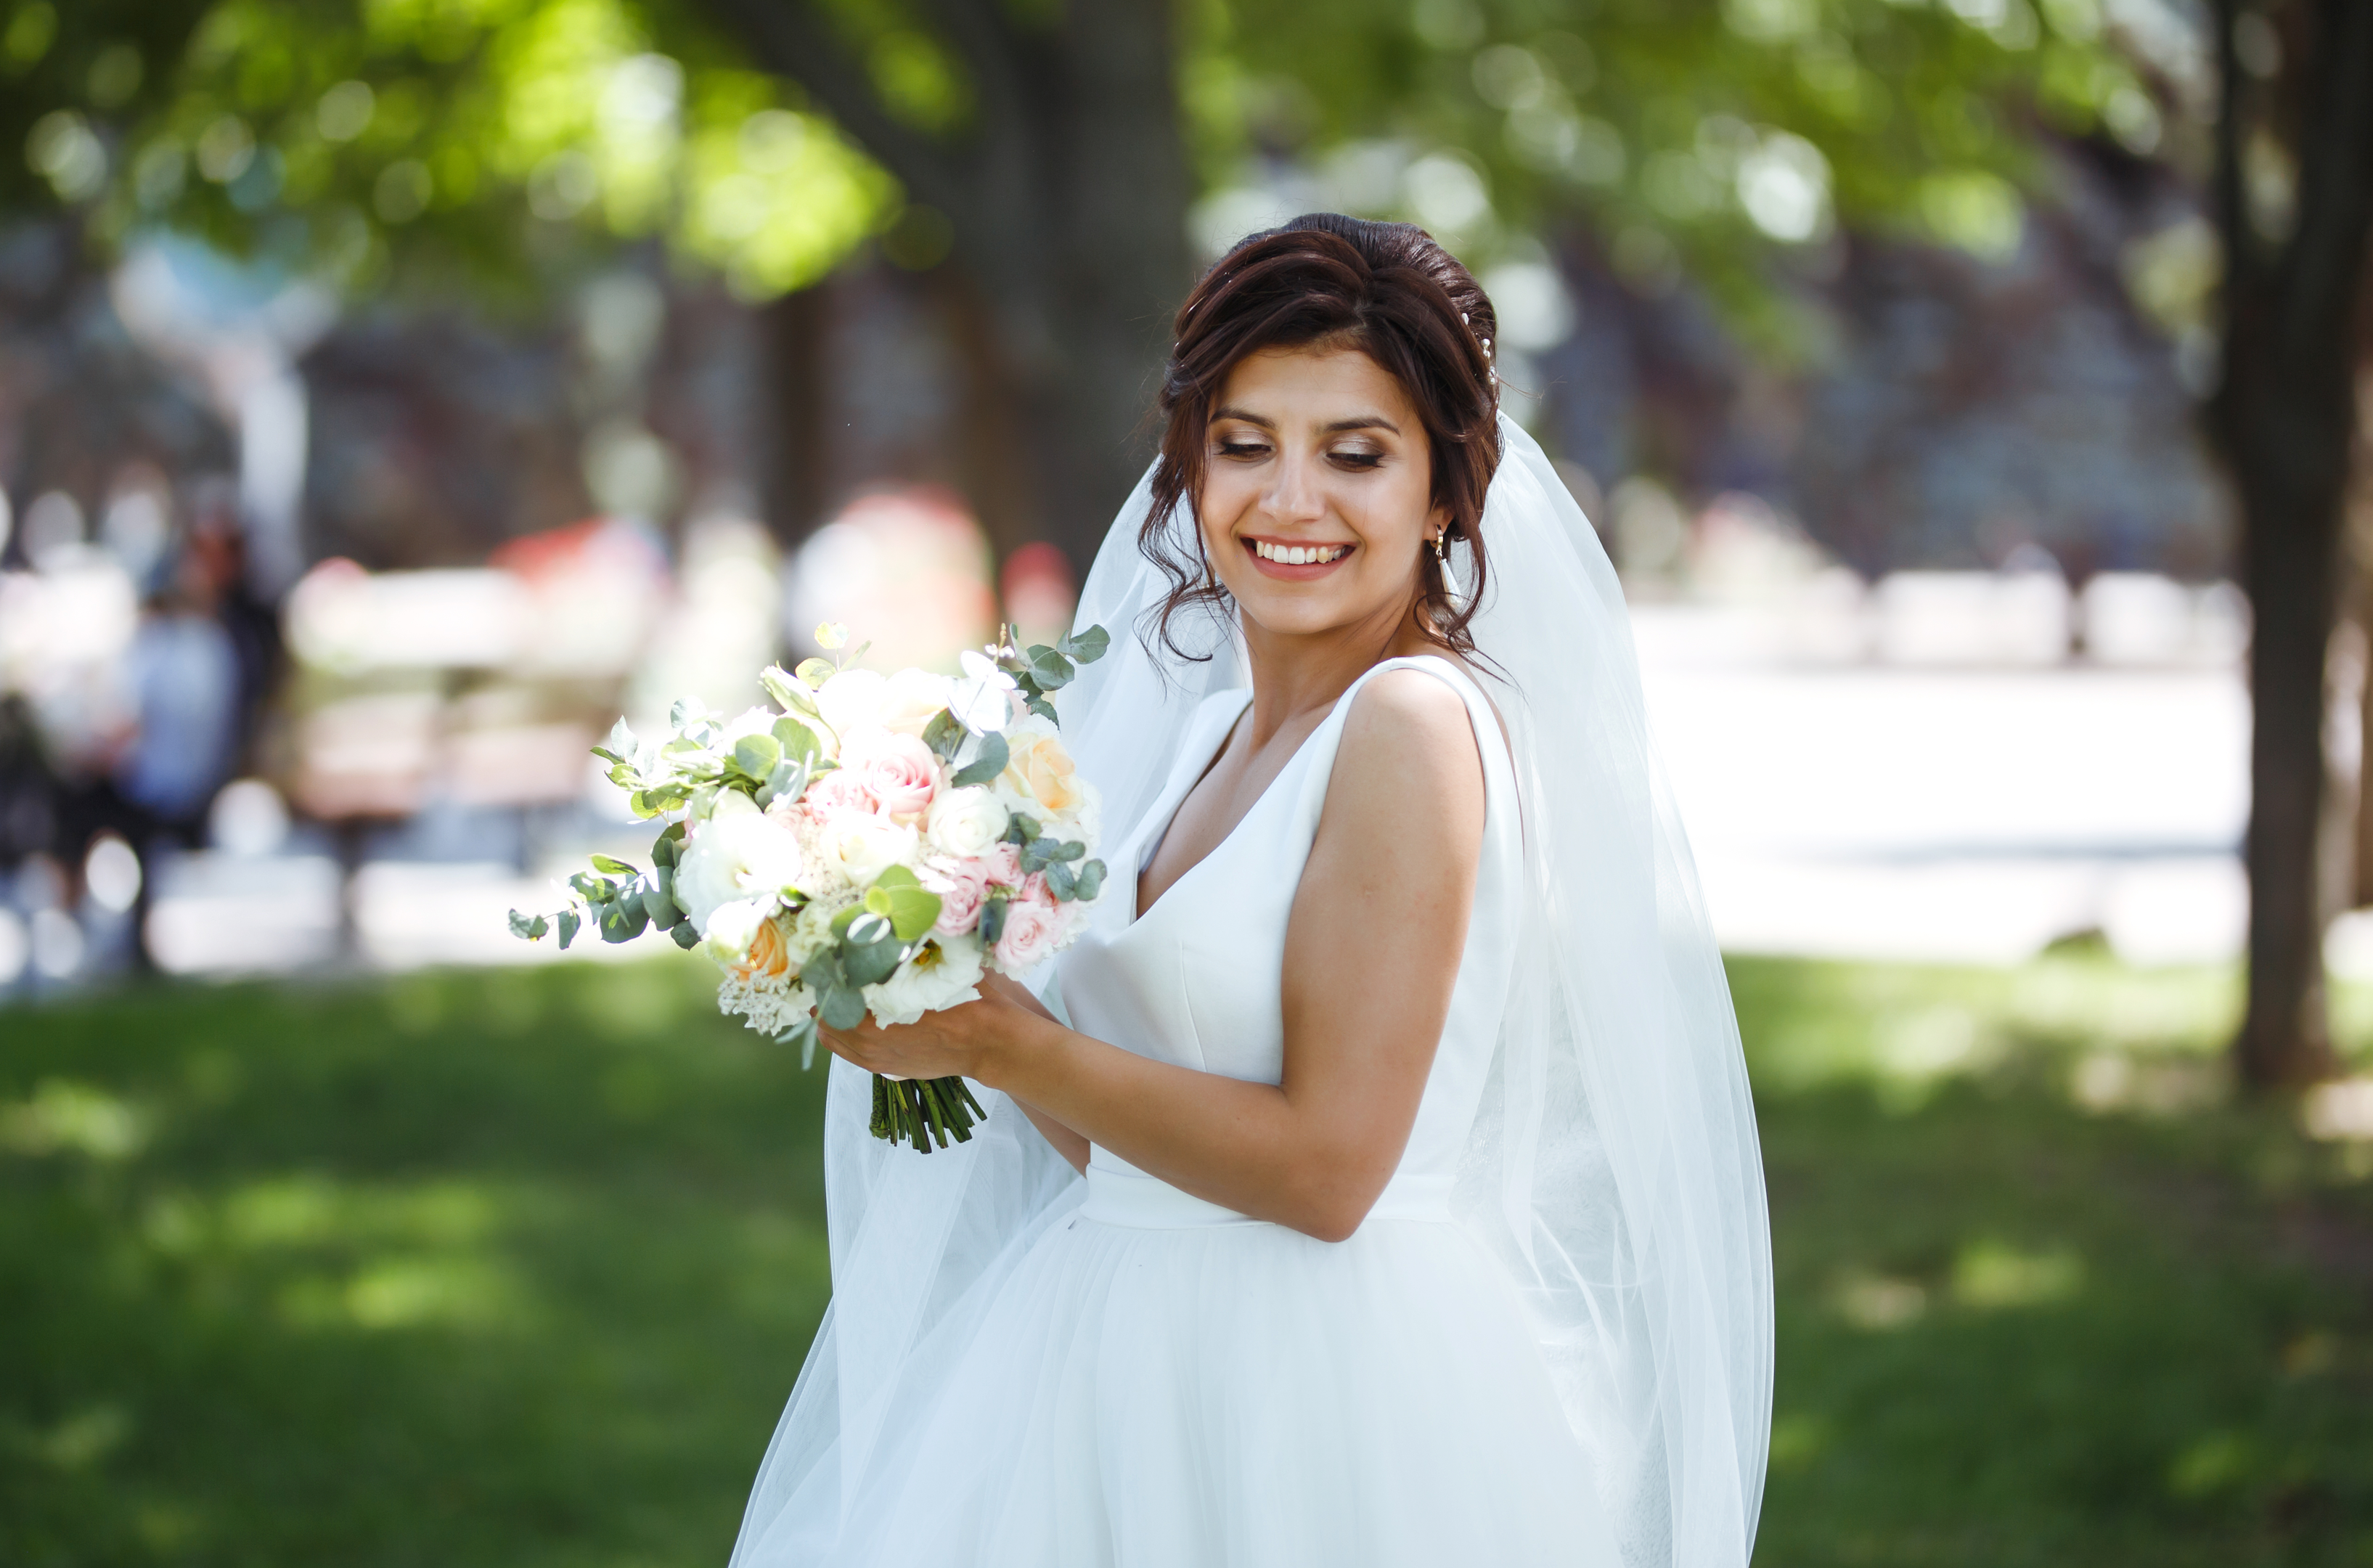 "Bride in white, strolling in the park, symbolizing the unity and interdependence of marriage."